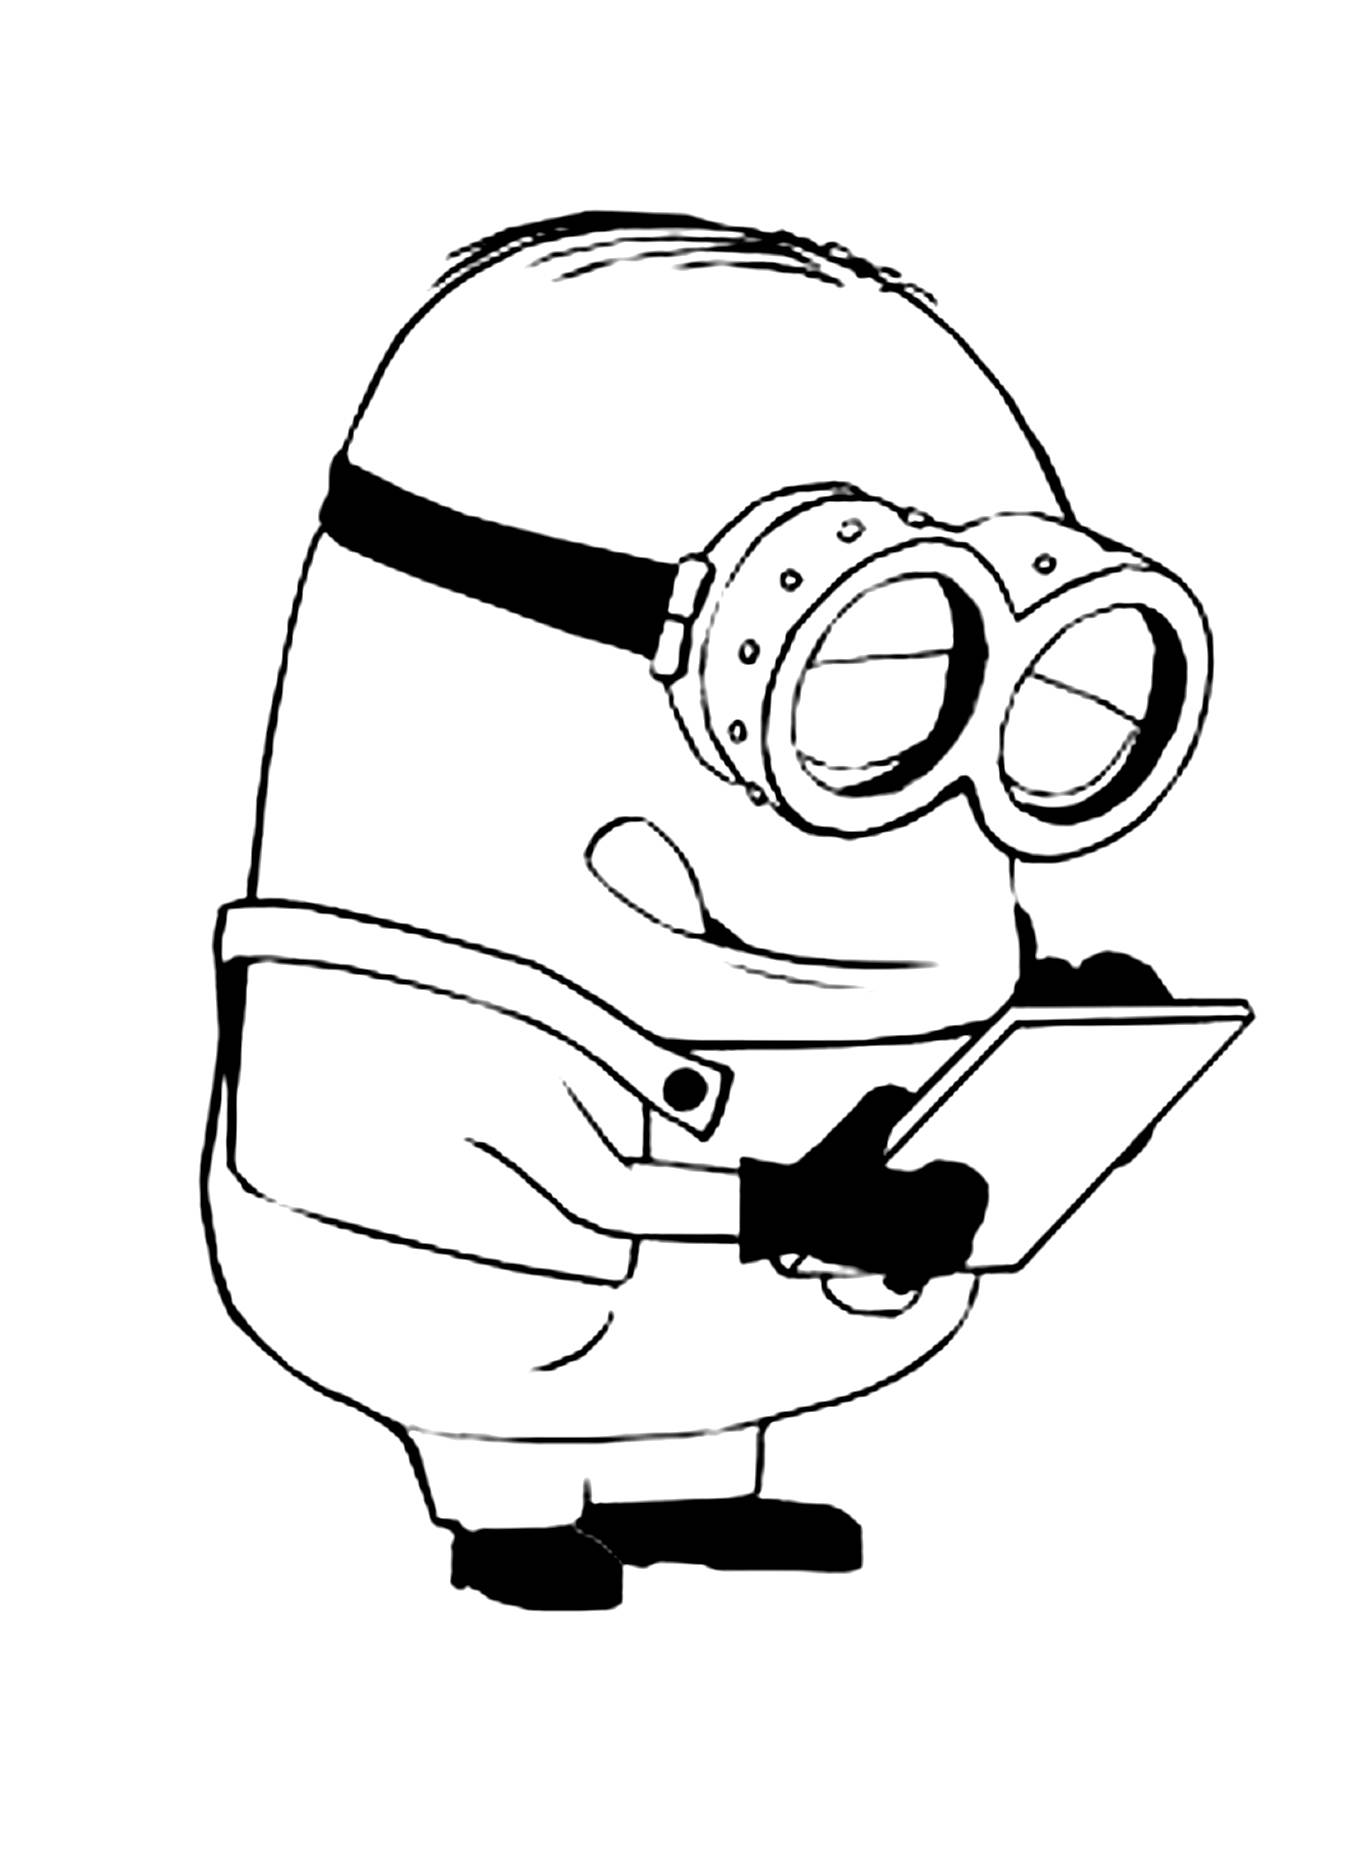 Easy coloring picture of Minions for kids